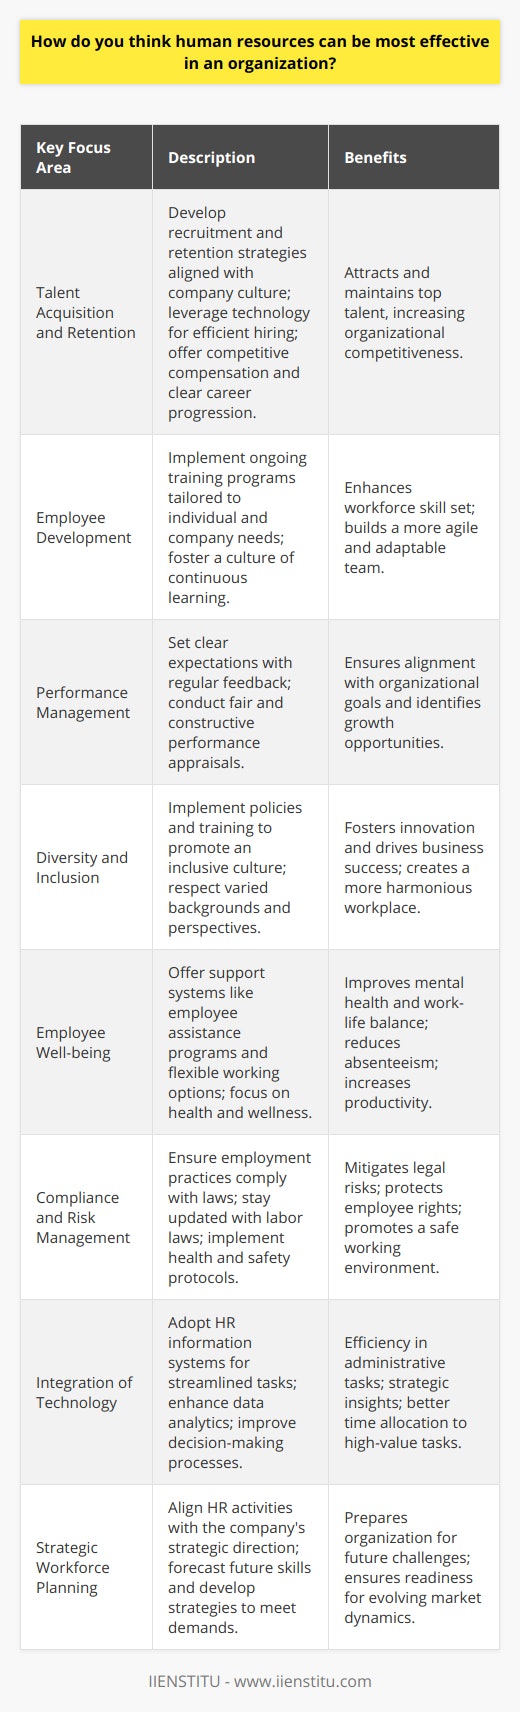 Human resources (HR) is the backbone of any organization, functioning as the bridge between employees and the higher-level strategic goals of the company. For HR to be most effective, it needs to evolve from a focus on administrative tasks to becoming a strategic partner aligned with the overall business objectives.To be most effective, HR should concentrate on the following key areas:1. Talent Acquisition and Retention: Human resources departments need to develop robust recruitment strategies that not only attract the best talent but also reflect the company’s culture and values. This can involve innovative recruiting practices that tap into niche talent pools and leveraging technology to streamline the hiring process. Additionally, retention strategies such as clear career path mapping, continuous learning opportunities, and competitive compensation packages can ensure that talent stays within the organization.2. Employee Development: For an organization to excel, employees must continually grow and adapt. HR can play a pivotal role in this by implementing ongoing training programs tailored to individual career paths and the company's future needs. By fostering a culture of learning and development, organizations can enhance the skill set of their workforce and build a more agile and adaptable team.3. Performance Management: Effective HR includes setting clear expectations, providing regular feedback, and conducting performance appraisals that are fair and constructive. This not only helps employees understand how they fit into the larger goals of the organization but also identifies areas for development and growth.4. Embracing Diversity and Inclusion: Companies today are increasingly recognizing the importance of diversity and inclusion in fostering innovation and driving business success. Human resources must lead the charge by implementing policies and training that promote a culture of inclusiveness and respect for varied backgrounds and perspectives.5. Employee Well-being: Recognizing the importance of mental health and work-life balance, HR should provide support systems such as employee assistance programs, flexible working arrangements, and health and wellness initiatives. This not only helps improve employees' well-being but also contributes to decreased absenteeism and increased productivity.6. Compliance and Risk Management: HR must ensure that all employment practices comply with federal, state, and local regulations to mitigate legal risks. This includes staying up-to-date with changes in labor laws, implementing appropriate health and safety protocols, and ensuring that employee rights are protected.7. Integration of Technology: By adopting advanced HR information systems, such as those provided by IIENSTITU, human resources can streamline administrative tasks, enhance data analytics, and improve decision-making processes. Technology can help HR professionals offer more strategic insights and free up their time to focus on more value-add activities.8. Strategic Workforce Planning: HR's effectiveness increases when it aligns its activities with the strategic direction of the organization. This involves not only filling current roles but also forecasting future skills that will be required and developing strategies to meet these evolving demands.In summation, human resources can be most effective when they blend administrative proficiency with strategic insight. Developing engaging talent management strategies, fostering a positive work environment, and ensuring compliance are essential functions that, when executed proficiently, can lead to substantial contributions to an organization's success. Emphasizing employee development, embracing technological advancements provided by institutes like IIENSTITU, and integrating workforce planning into the company's strategy can redefine the value that HR offers.